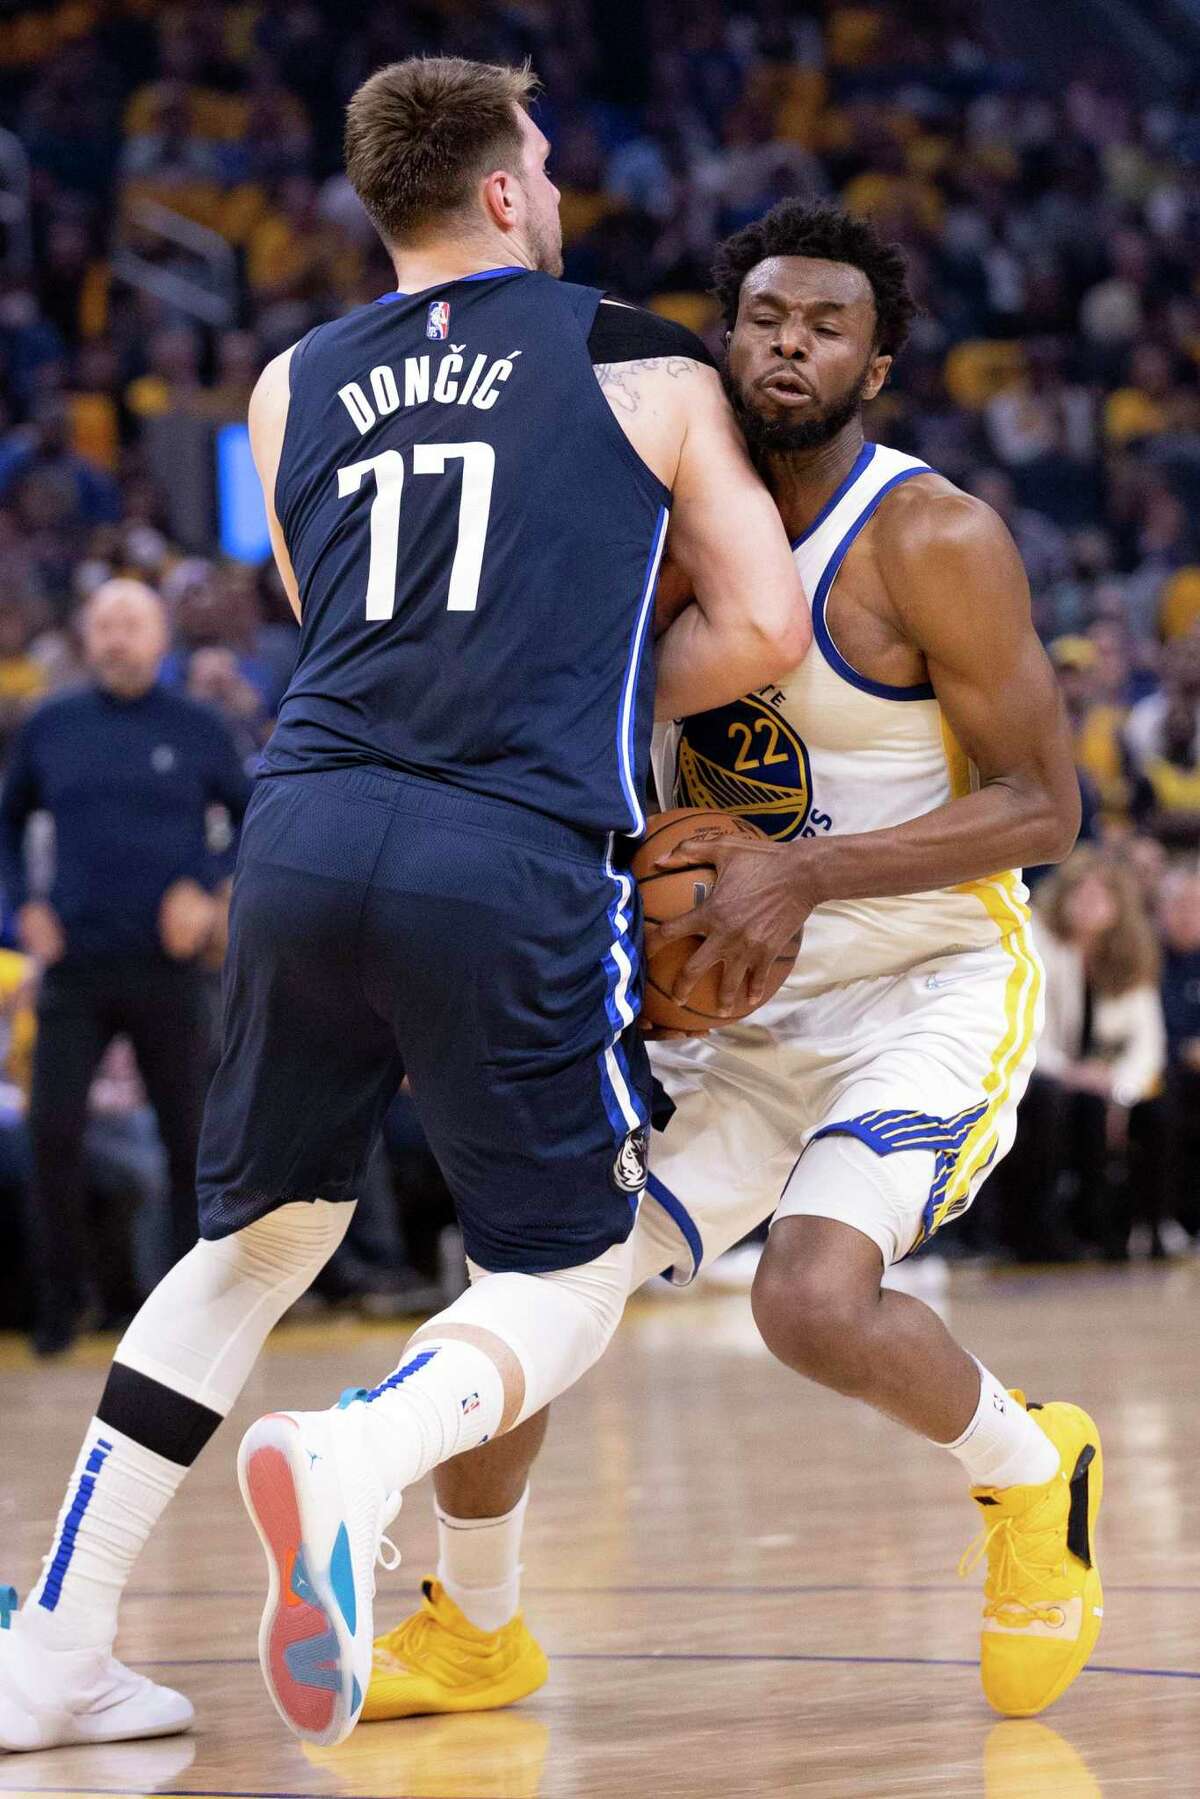 Dallas Mavericks’ Luka Doncic puts his shoulder into Golden State Warriors’ Andrew Wiggins during 1st quarter of Game 2 of NBA Western Conference Finals at Chase Center in San Francisco, Calif., on Friday, May 20, 2022. Wiggins score don the play but no foul was called.